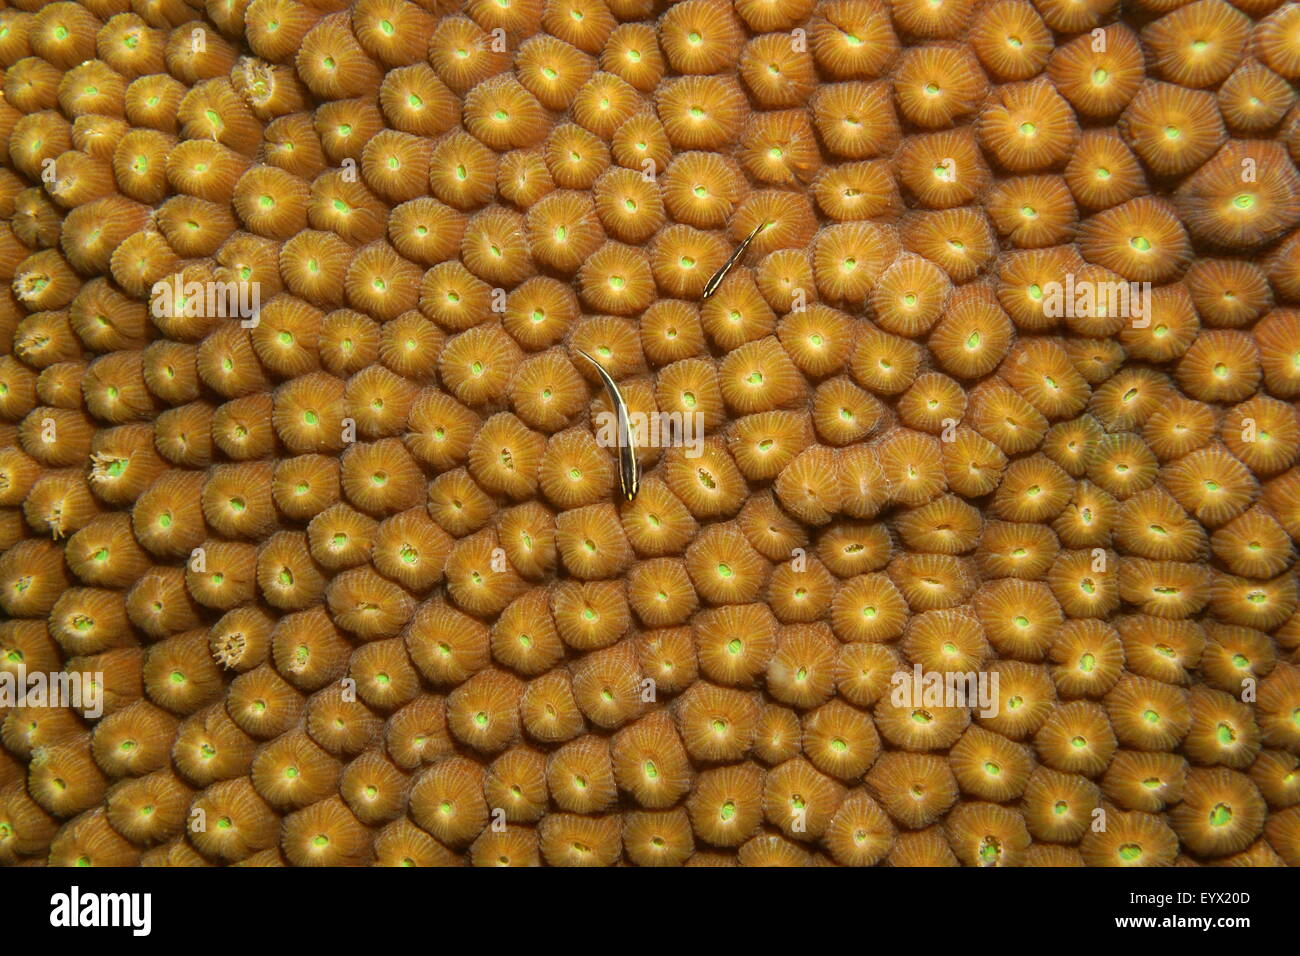 Coral underwater, close-up of Great star coral, Montastraea cavernosa, Caribbean sea Stock Photo